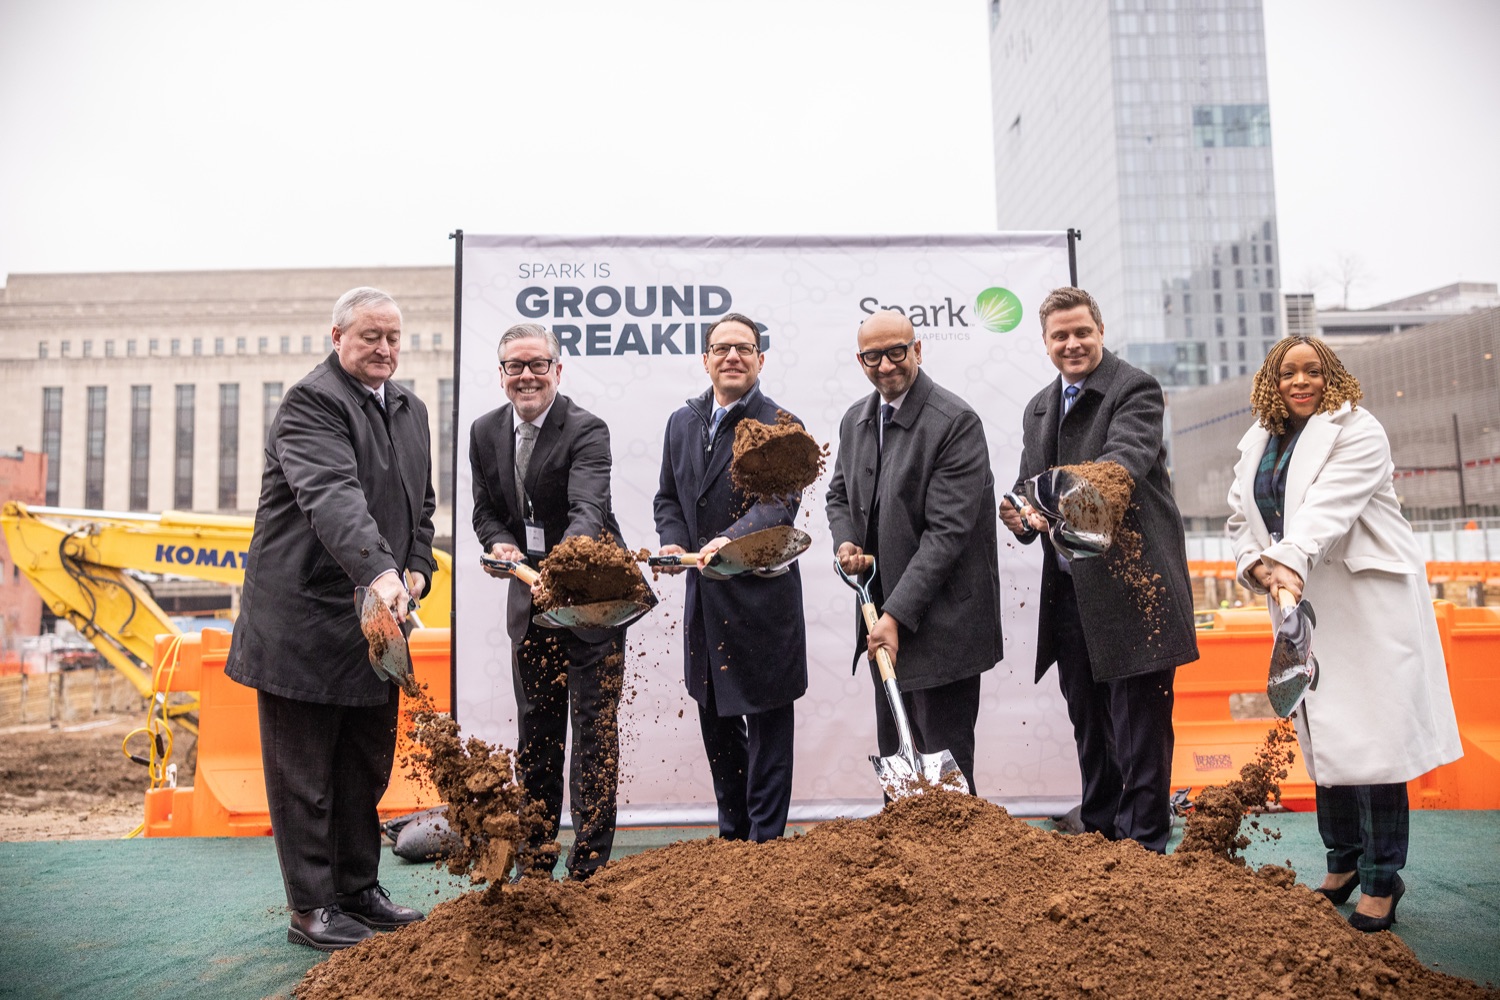 Pennsylvania Governor Josh Shapiro participates in a groundbreaking for Spark Therapeutics at the future site of their new building, at 30th and Chestnut streets.  FEBRUARY 28, 2023 - PHILADELPHIA, PA<br><a href="https://filesource.amperwave.net/commonwealthofpa/photo/22728_gov_spark_dz_0001.JPG" target="_blank">⇣ Download Photo</a>